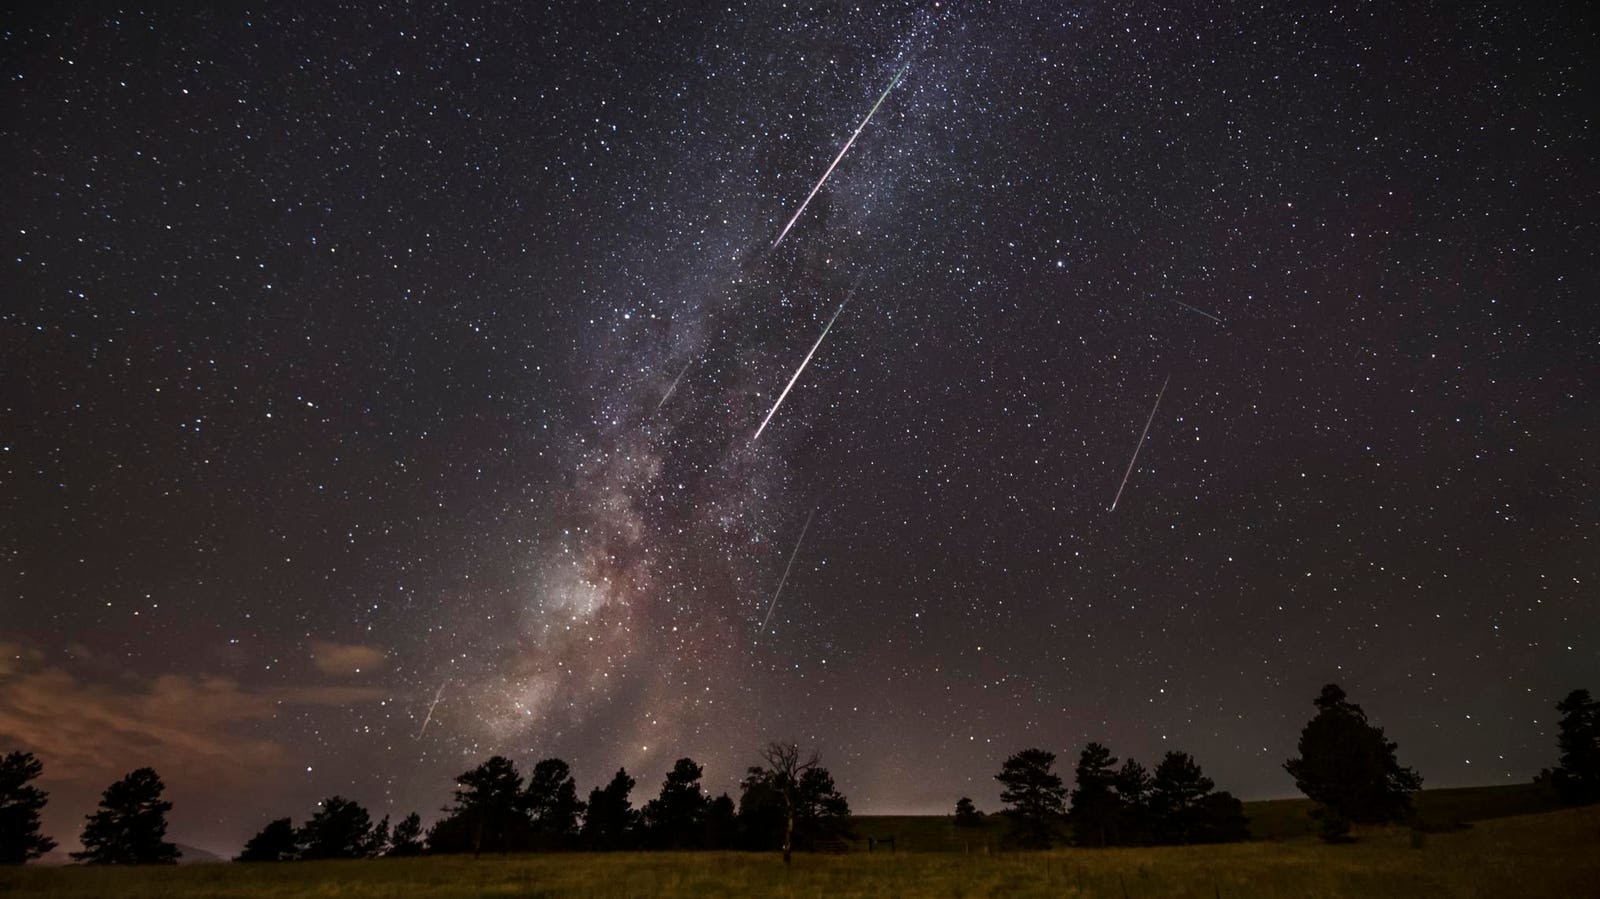 Here’s When To See The Perseid Meteor Shower Peak In Every U.S. State